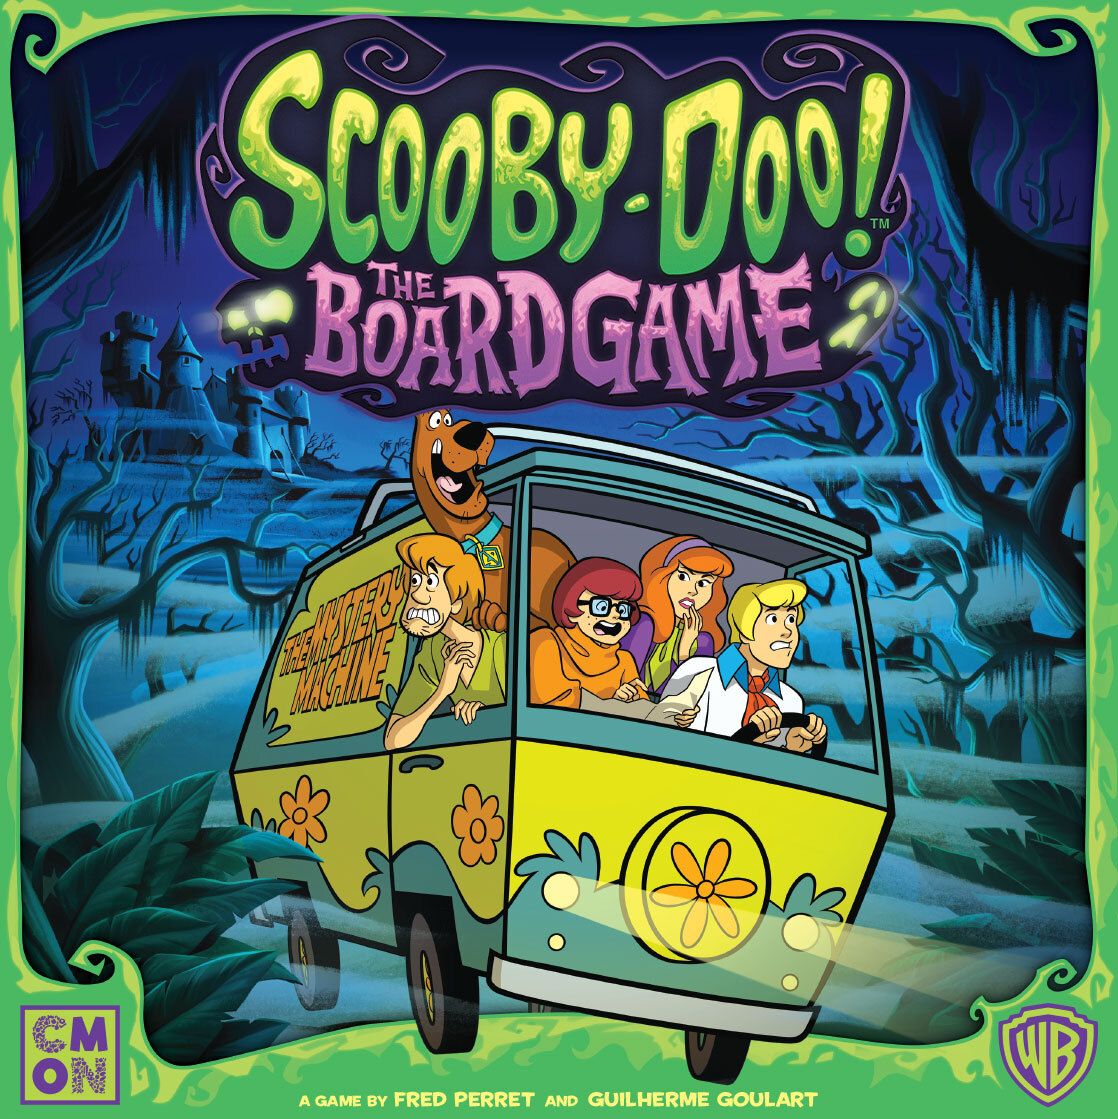 Scooby Doo The Board Game